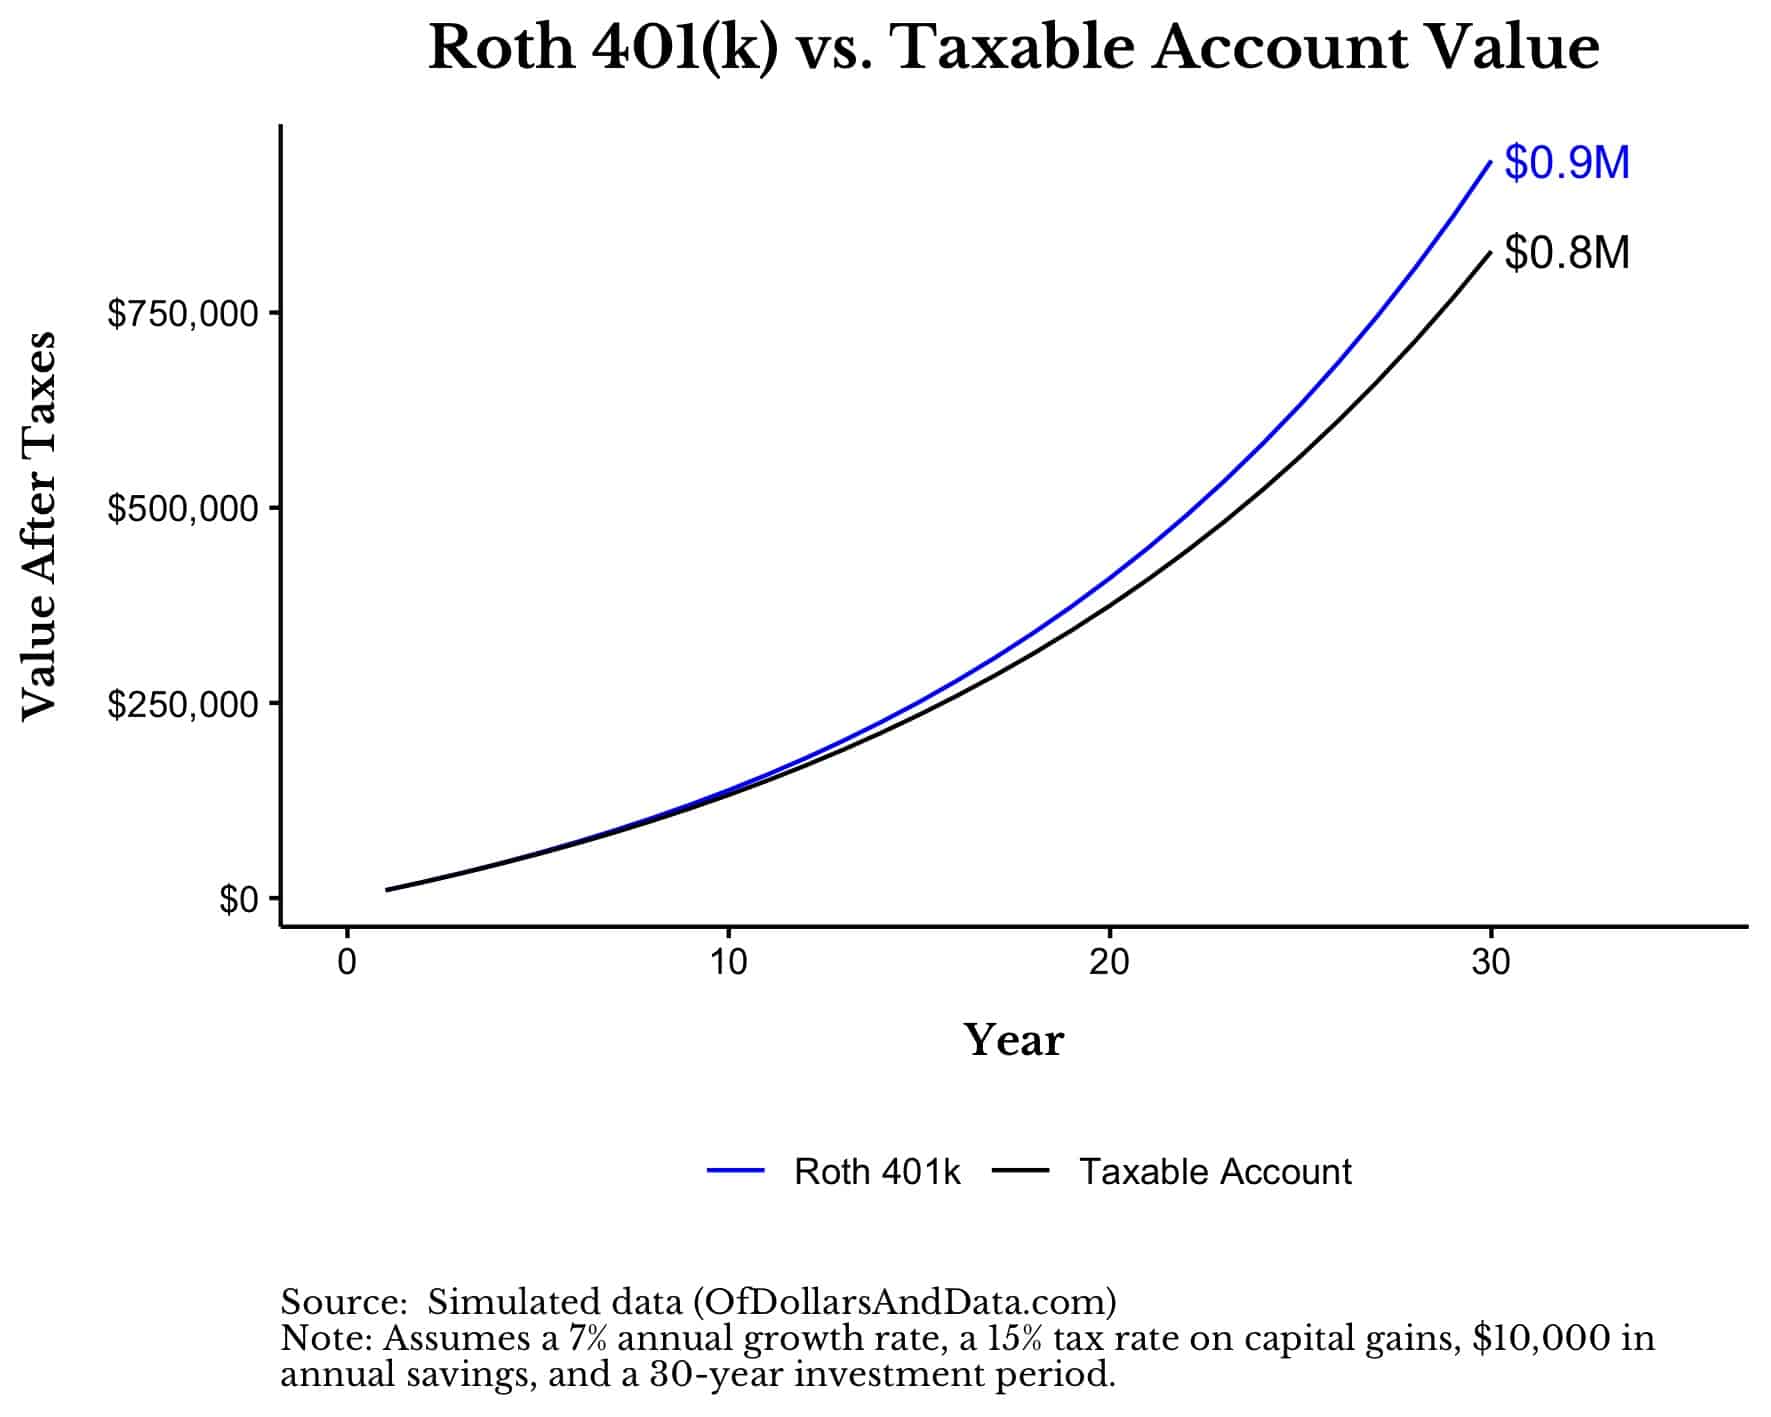 Chart of Roth 401k vs taxable account growth over 30 years.